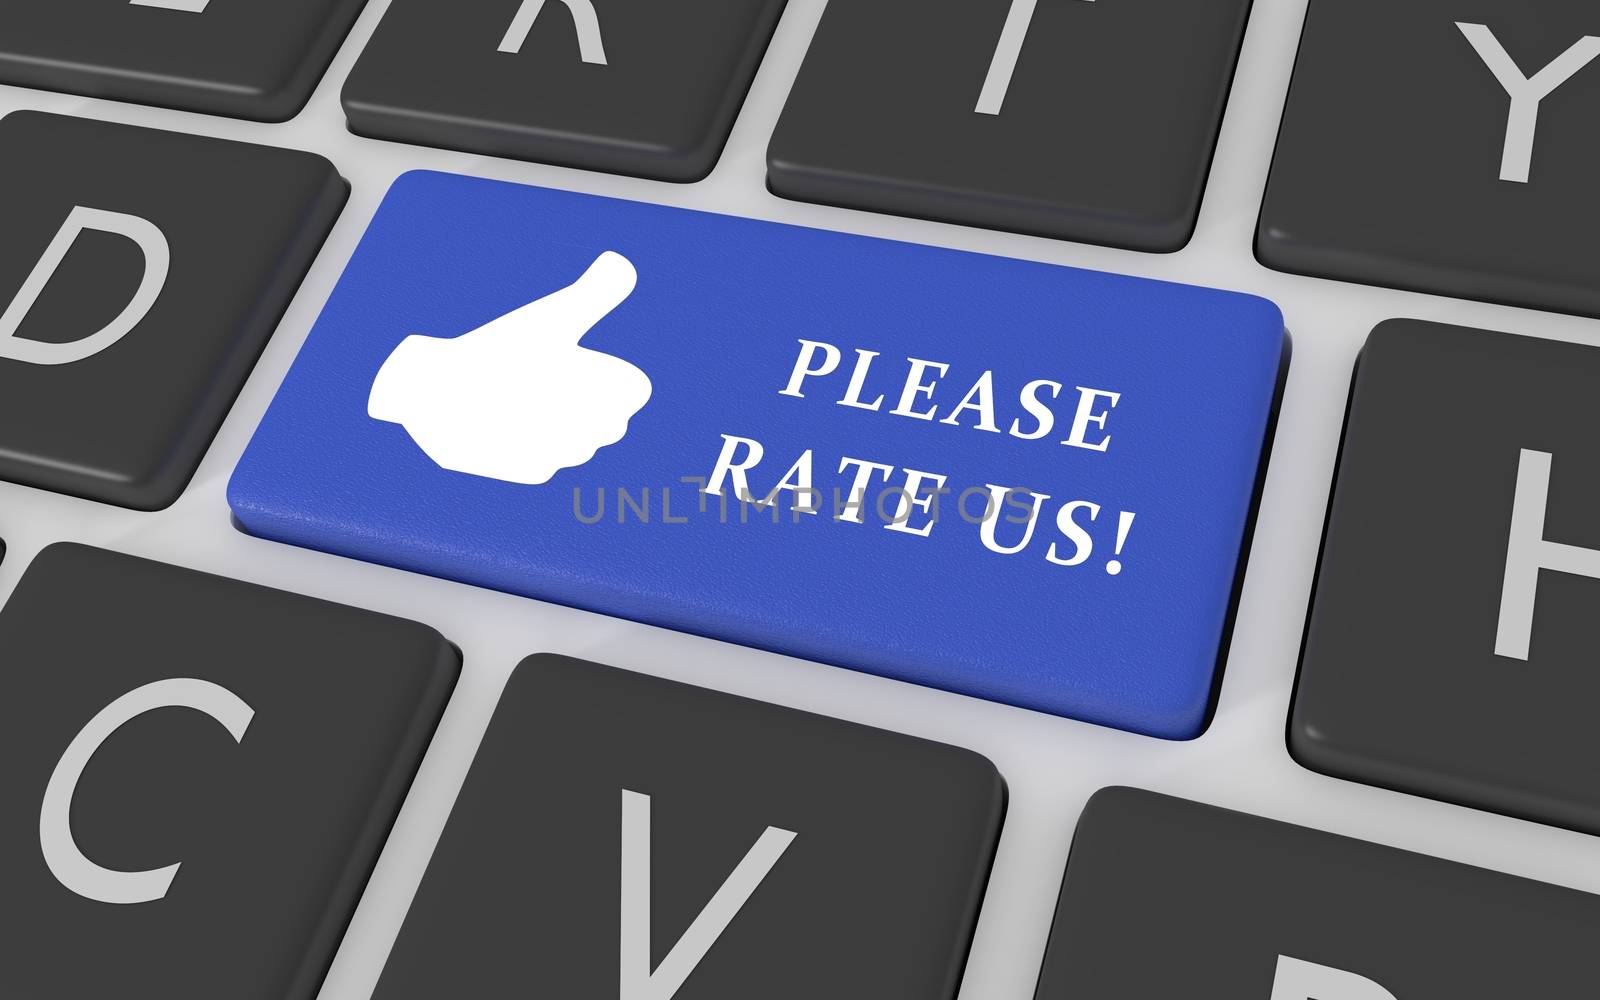 Rate us button by darrenwhittingham